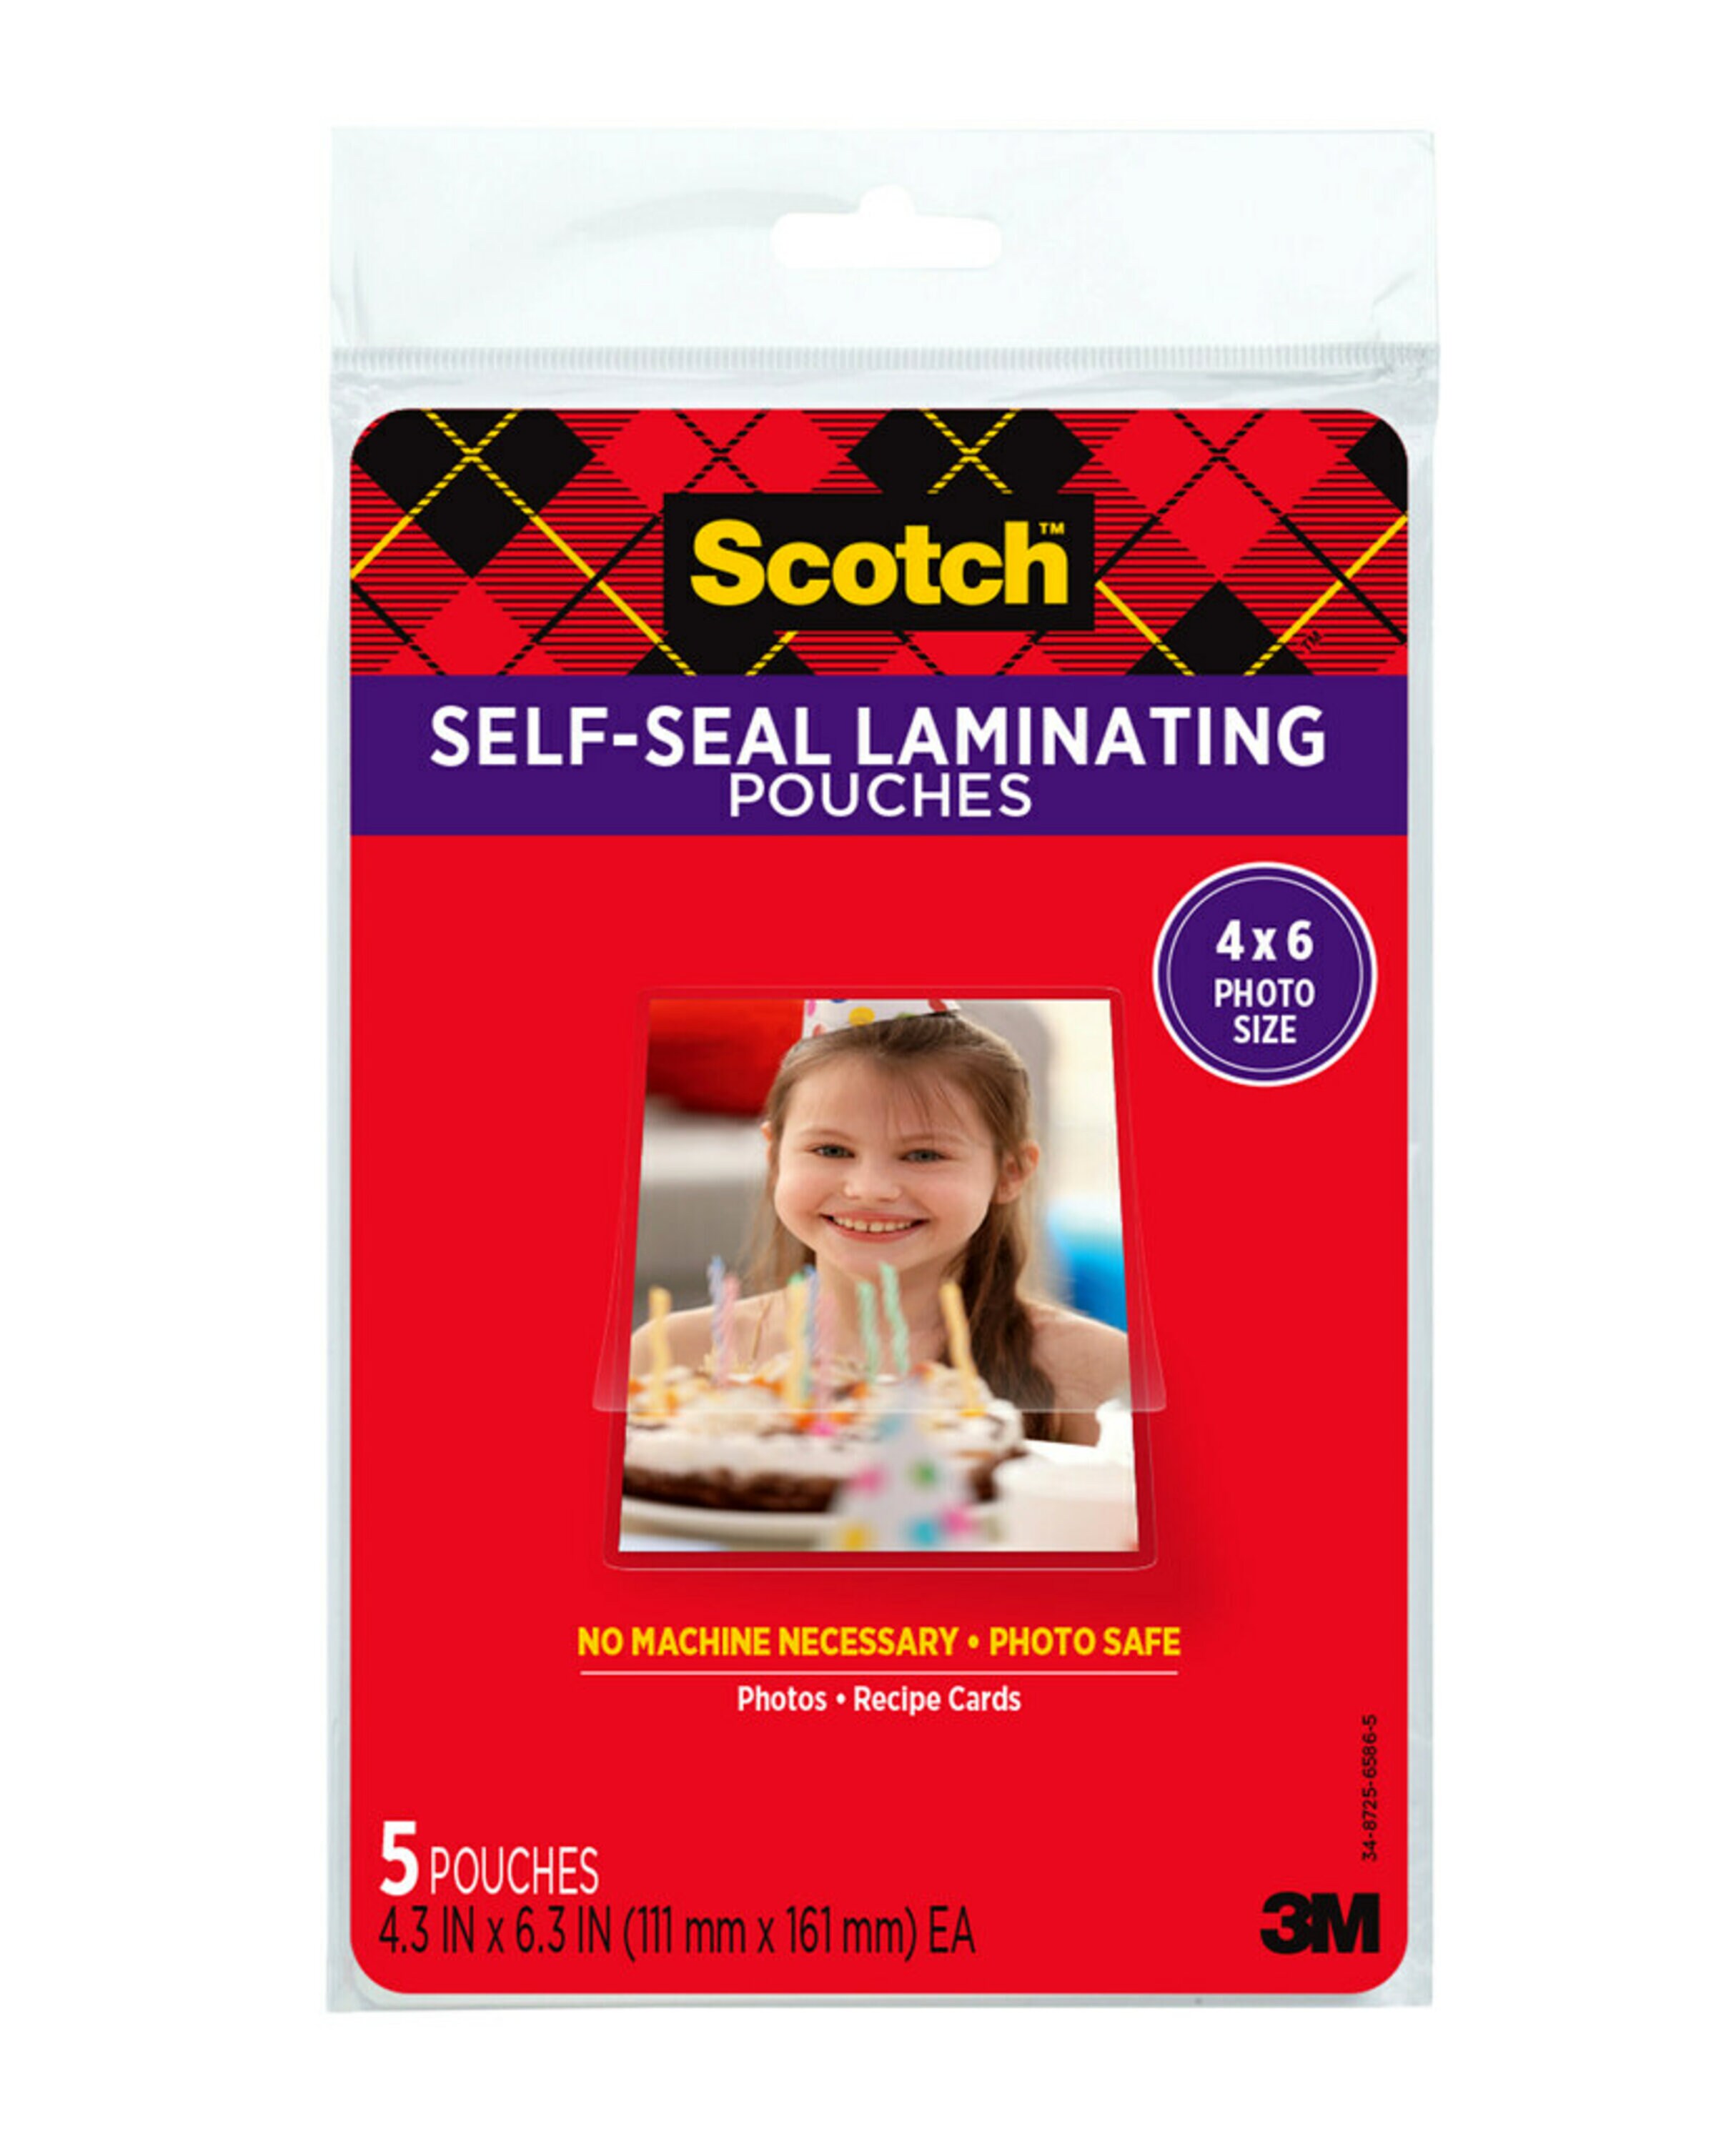 Scotch ™ Self-Sealing Laminating Pouches 4.3 in x 6.3 in, Gloss Finish - image 1 of 8